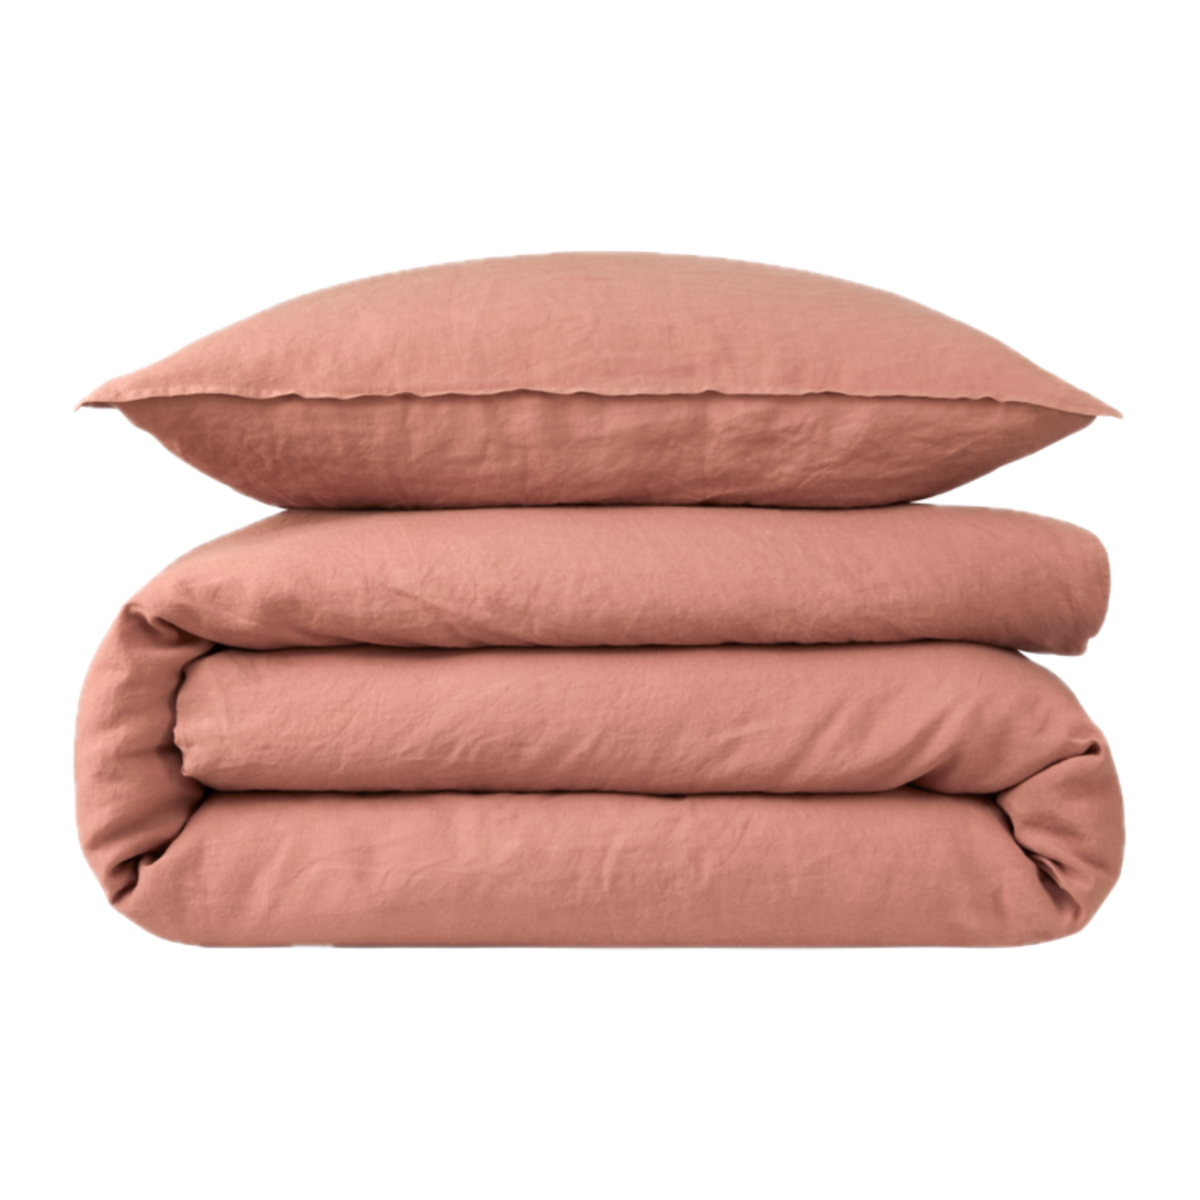 Stack of Sham and Duvet Cover of Sienna Yves Delorme Originel Bedding